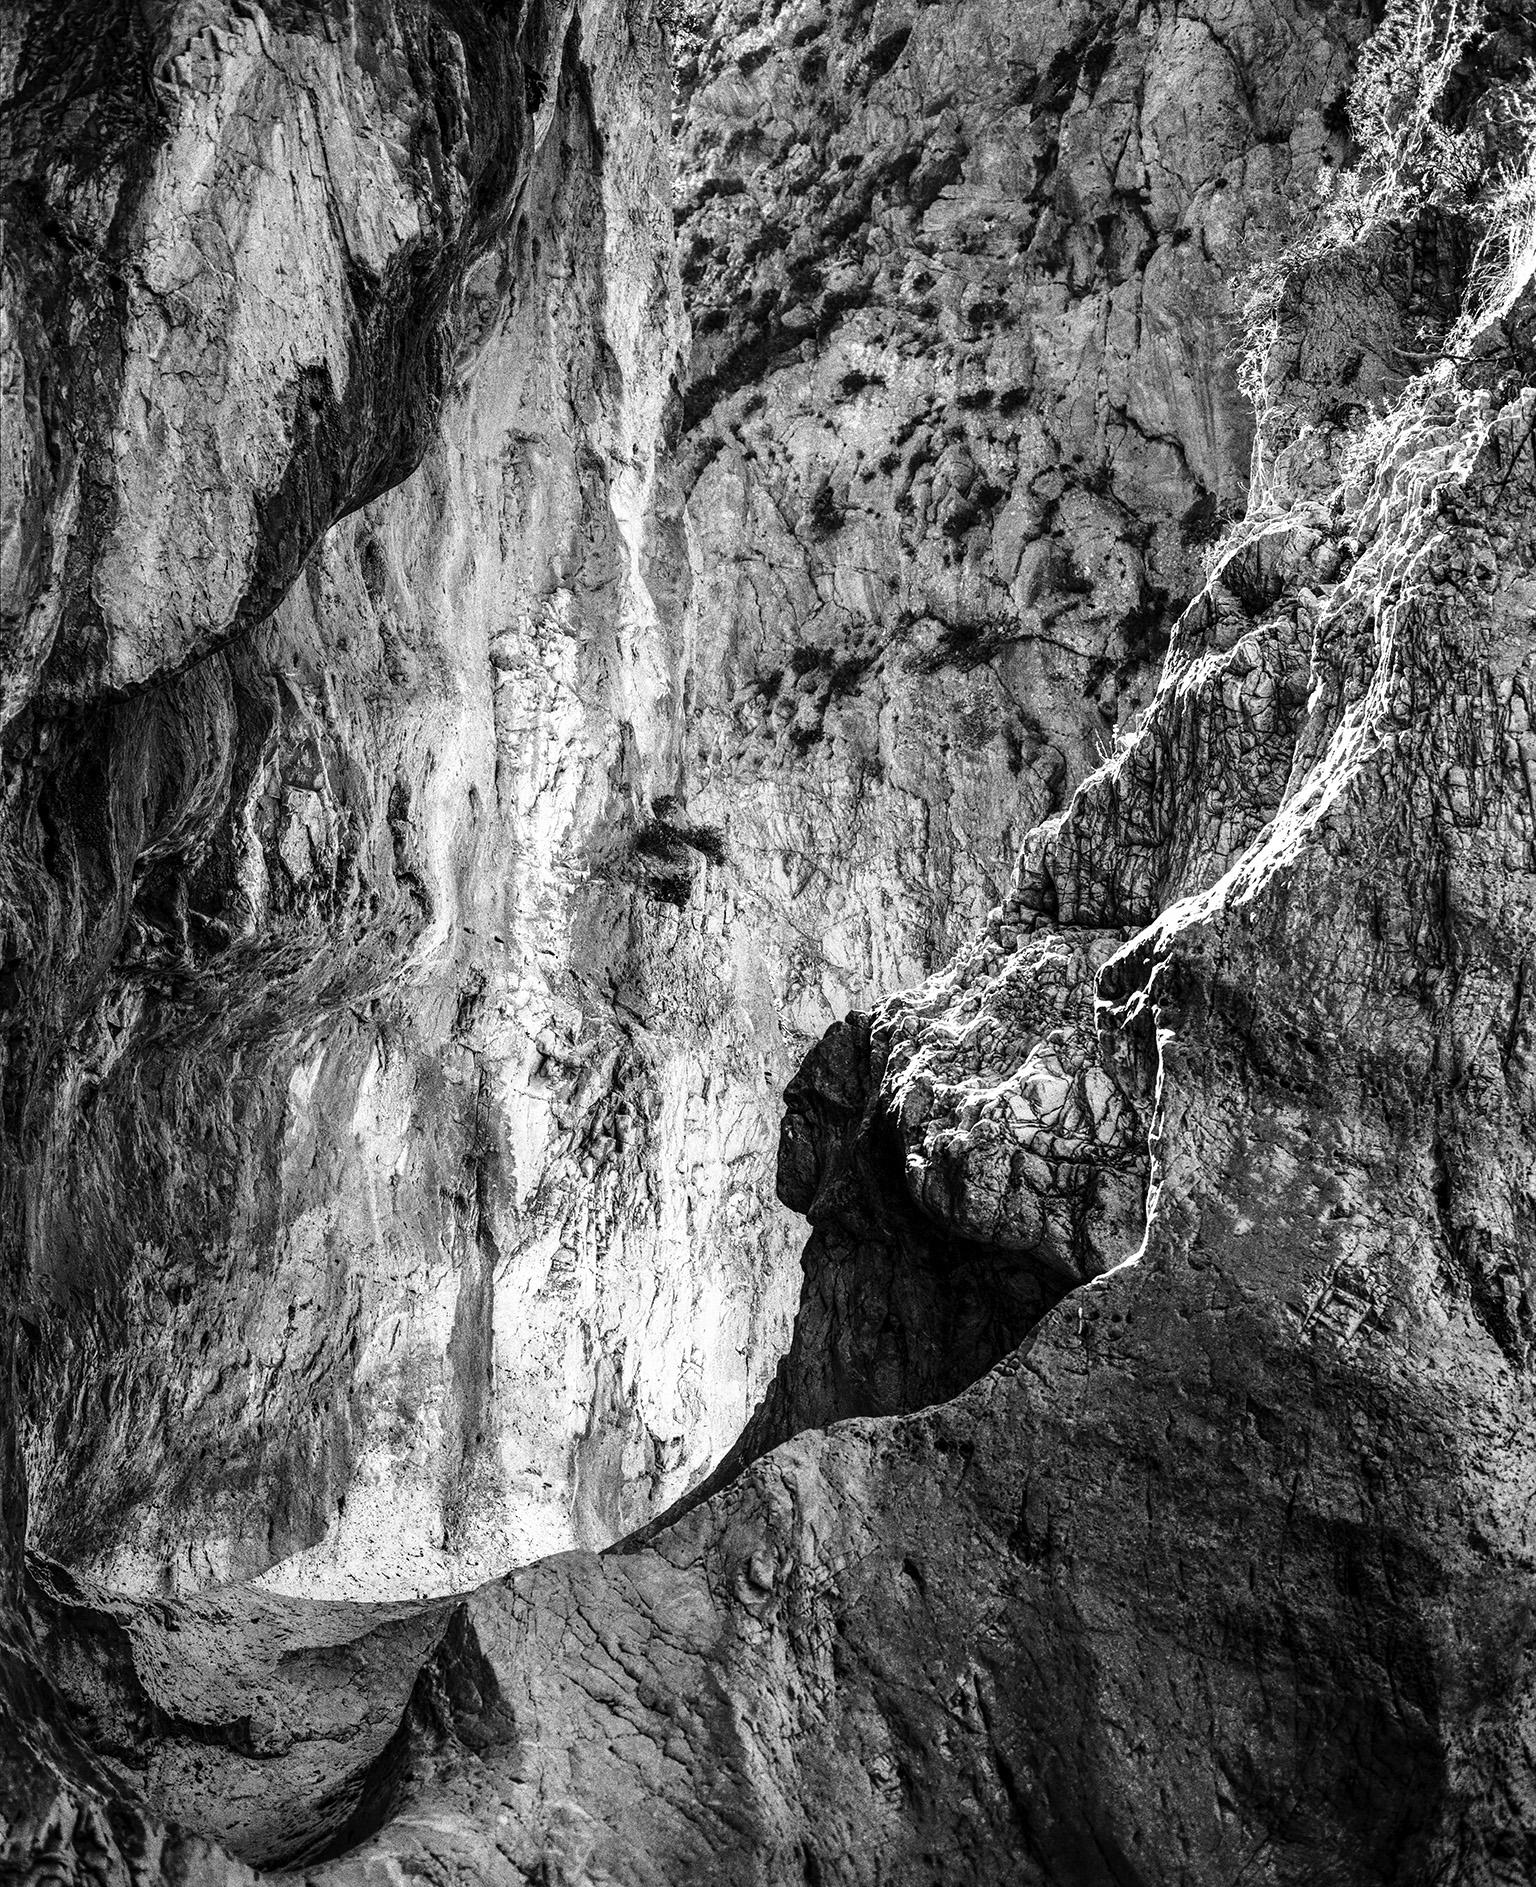 Homage to Heraclitus: Earth I - Black and White Landscape Photograph of a Cave